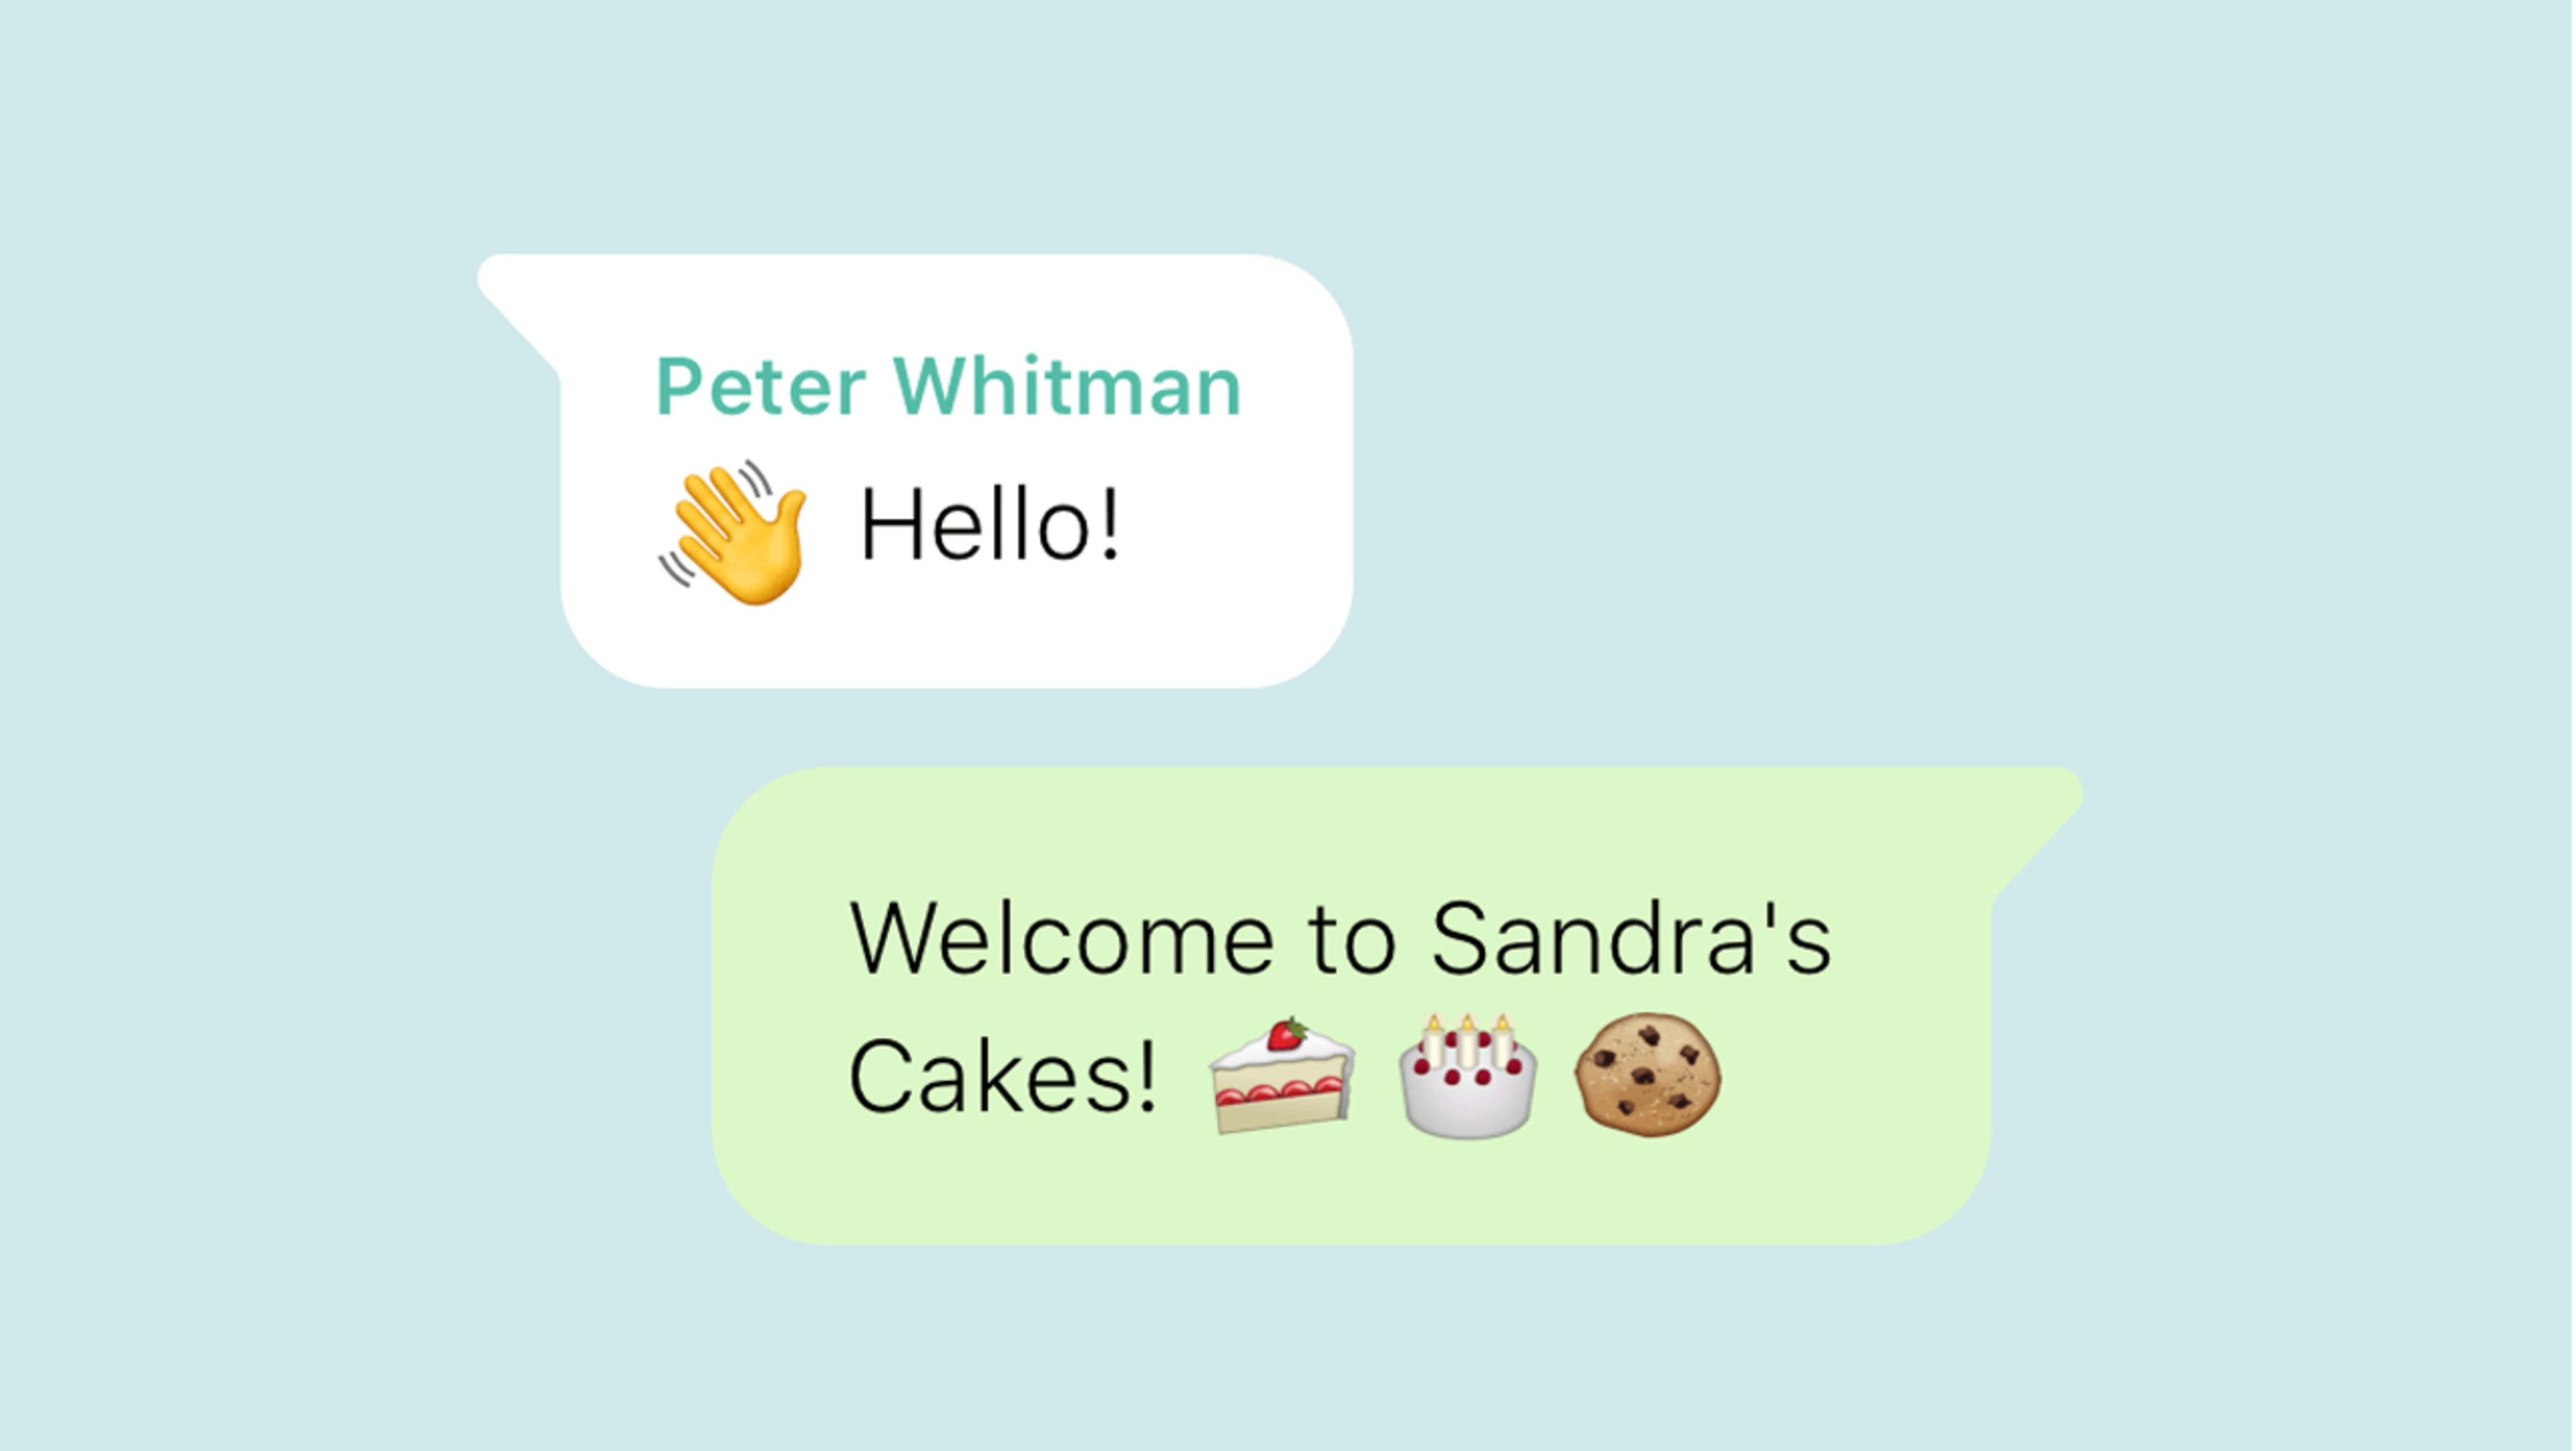 WhatsApp launches its new Business messenger app